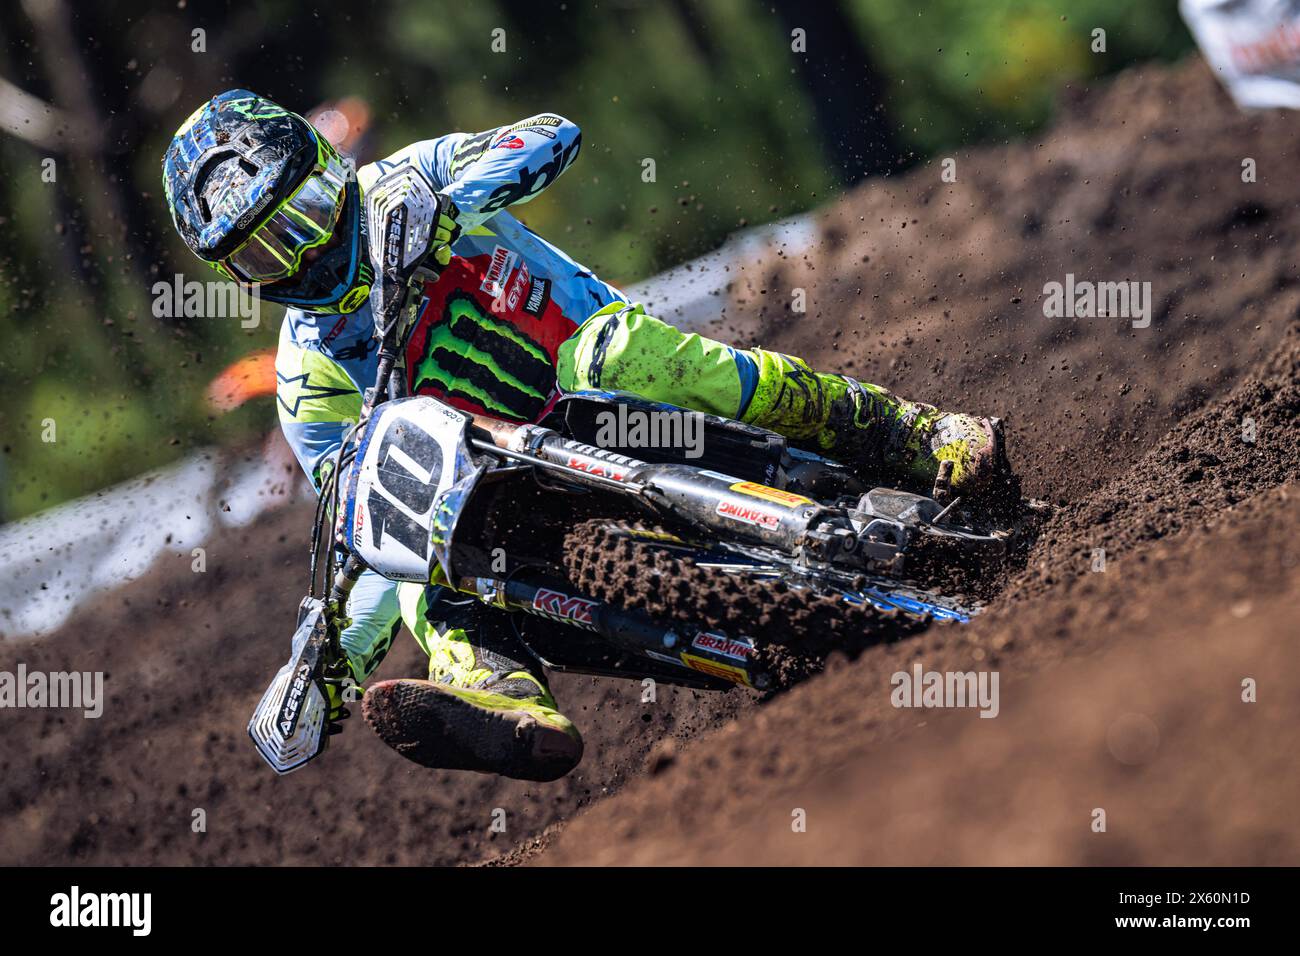 Spain, Spain. 12th May, 2024. Motocross World Championship-Round 6-MXGP of Galicia-Lugo-12 Maggio 2024-MXGP MXGP Class-Calvin Vlanderen-Team Yamaha Factory during MXGP of Galicia, Motocross race in Spain, Spain, May 12 2024 Credit: Independent Photo Agency/Alamy Live News Stock Photo